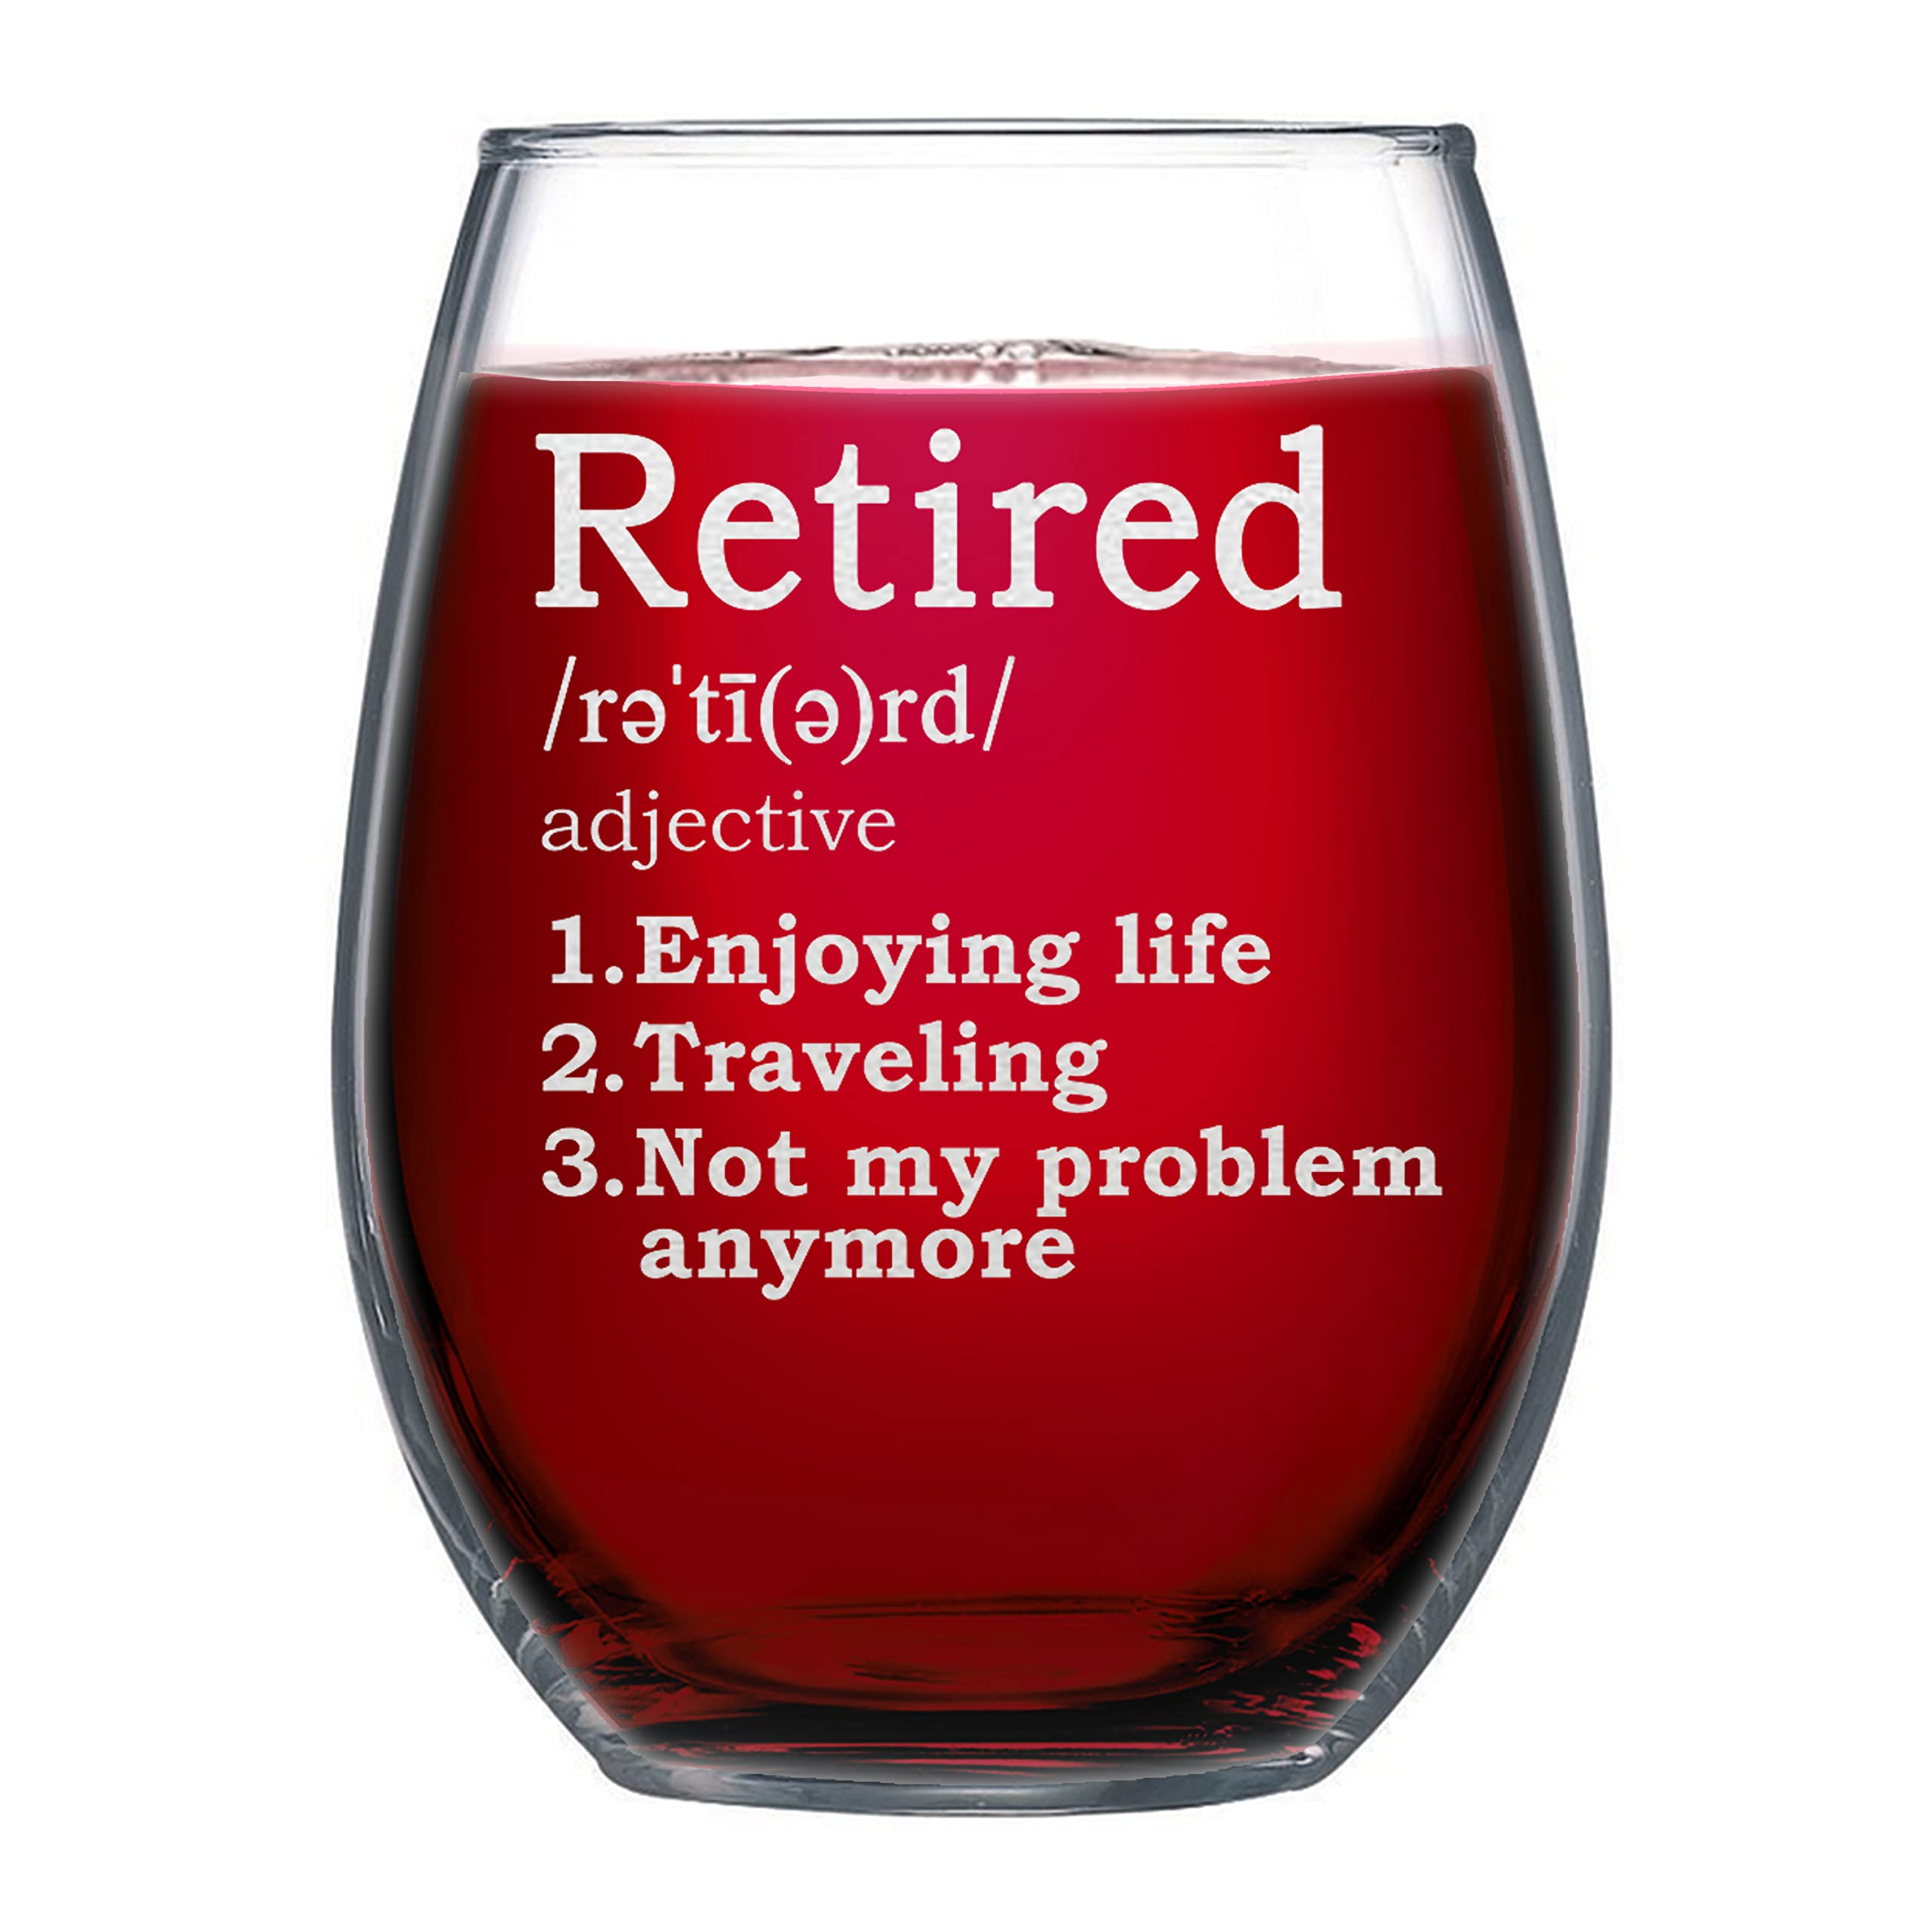 NeeNoNex Retired Definition - Wine Glass Funny and Great Retirement Gift for Coworkers Boss Mom Dad Funny Dictionary Definition